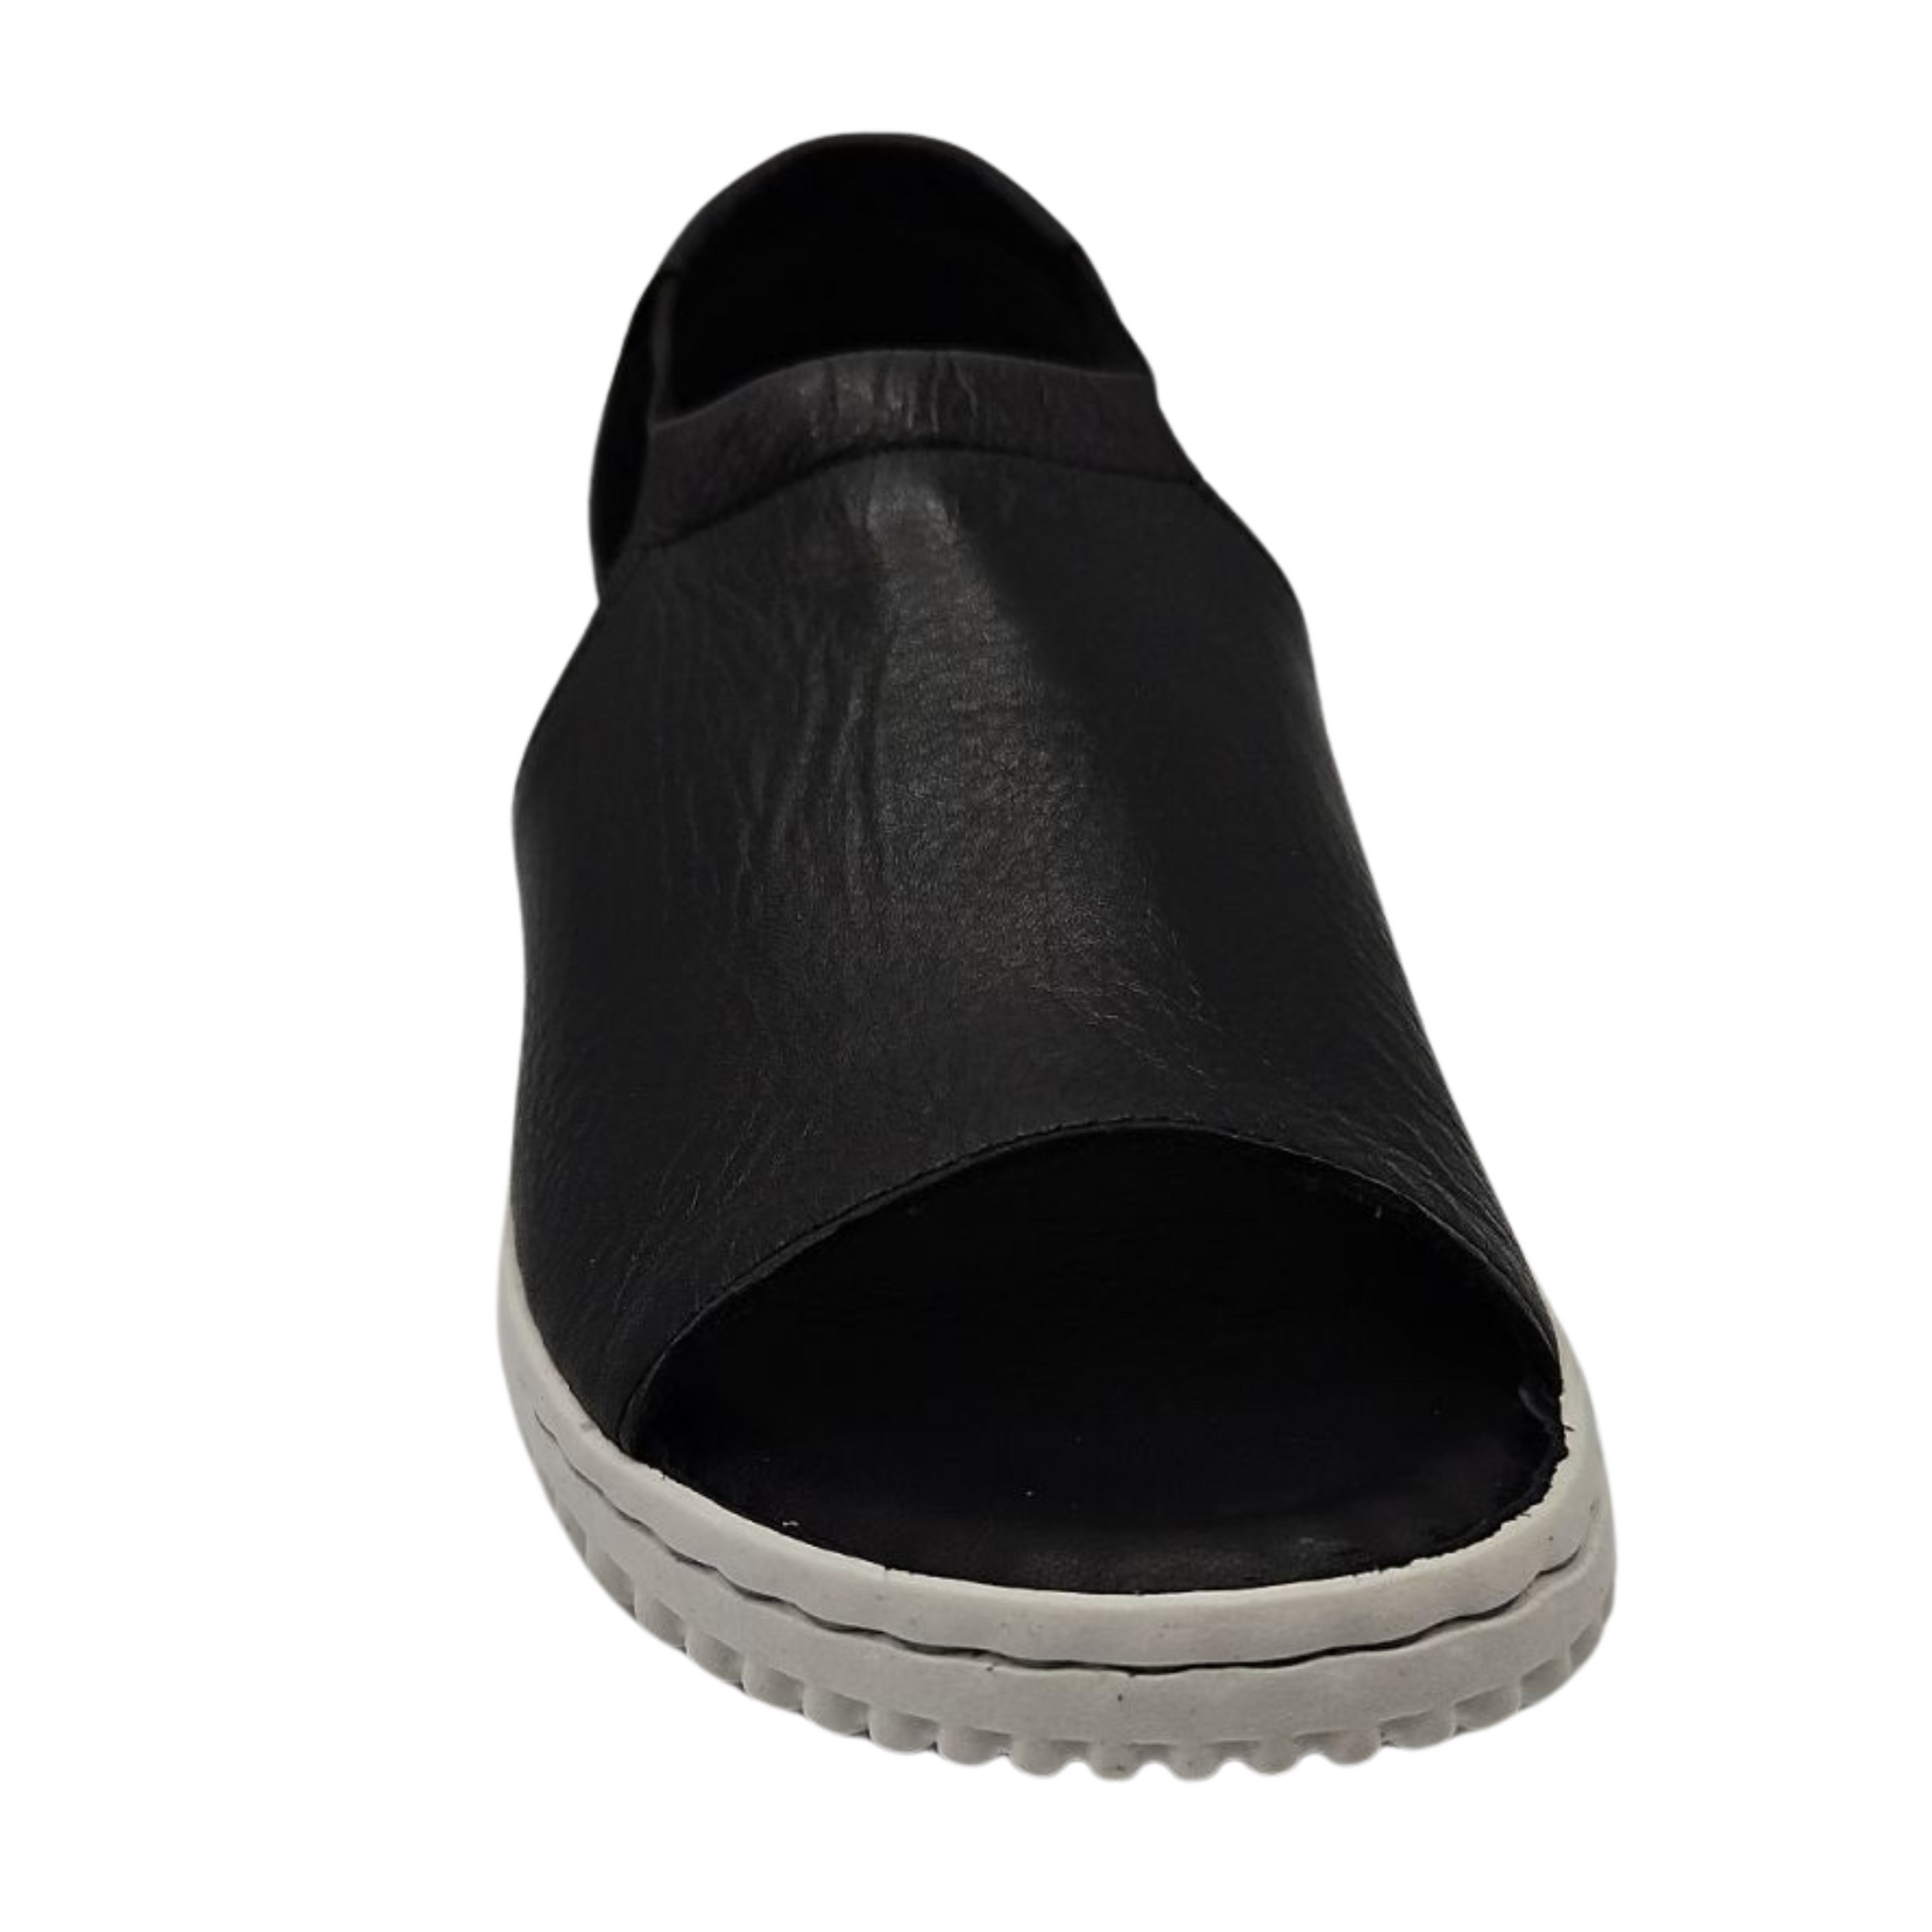 Front view of black sandal with peep toe, white rubber outsole and elastic sides.